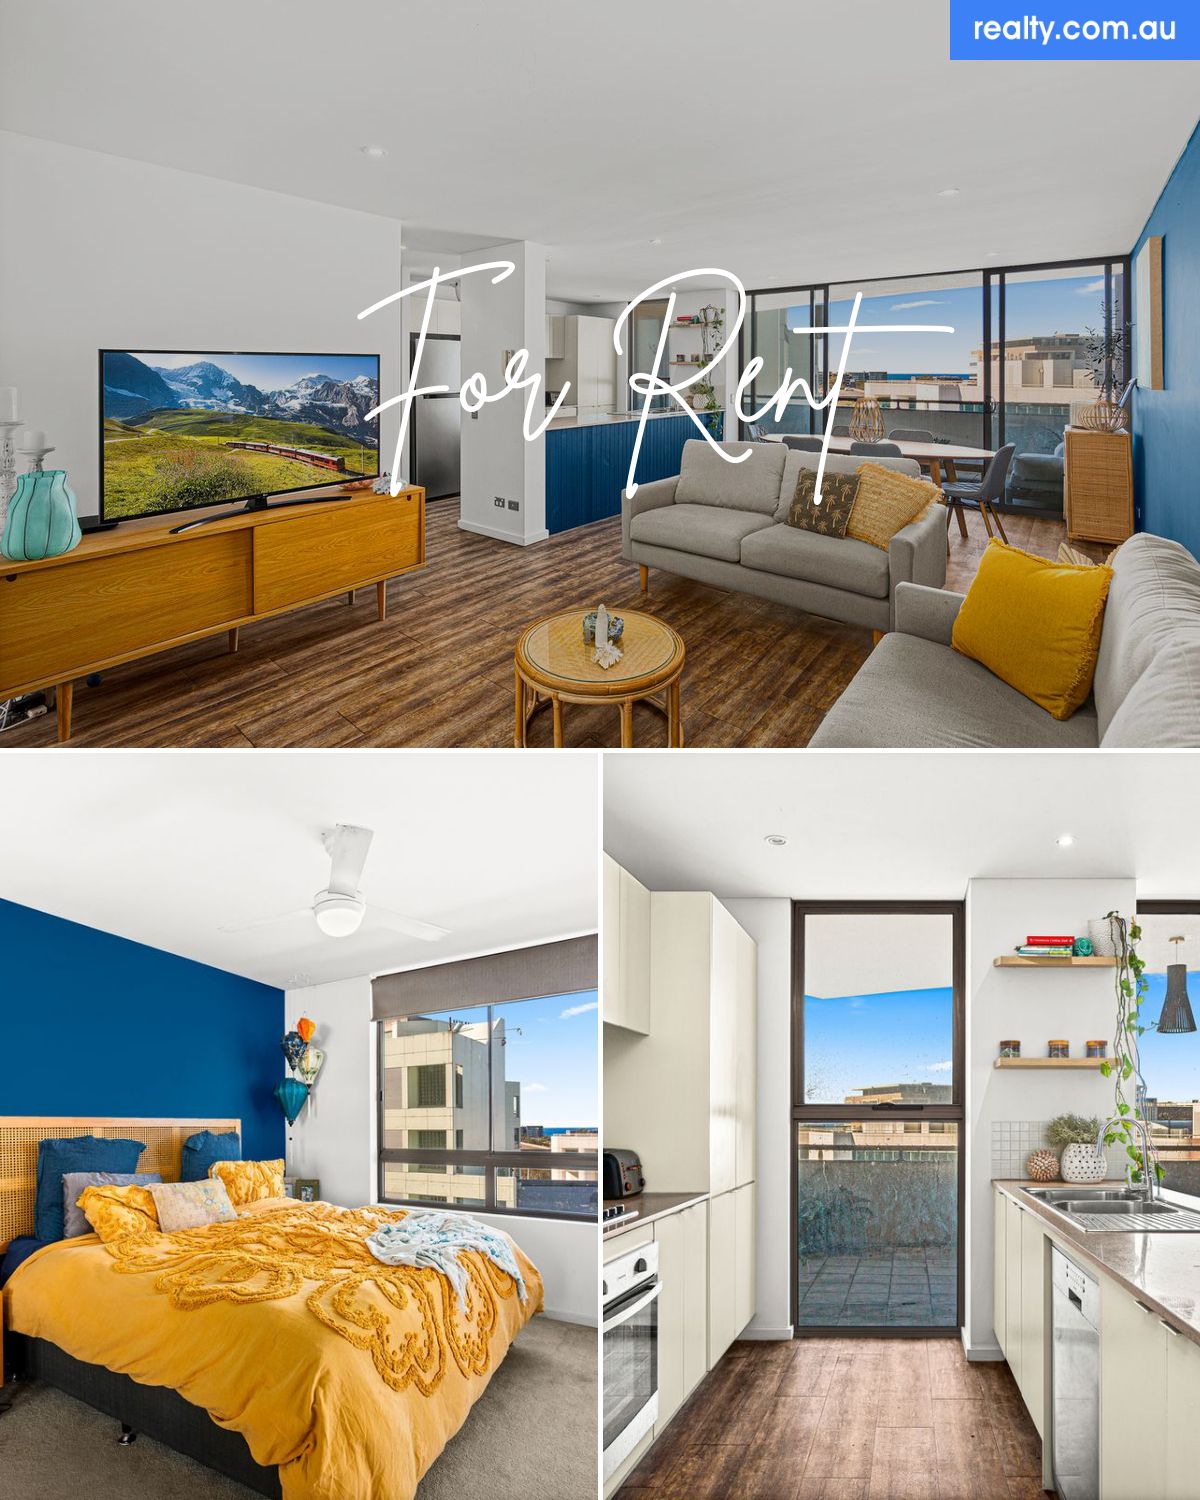 58/313-323 Crown St, Wollongong, NSW 2500 | Realty.com.au